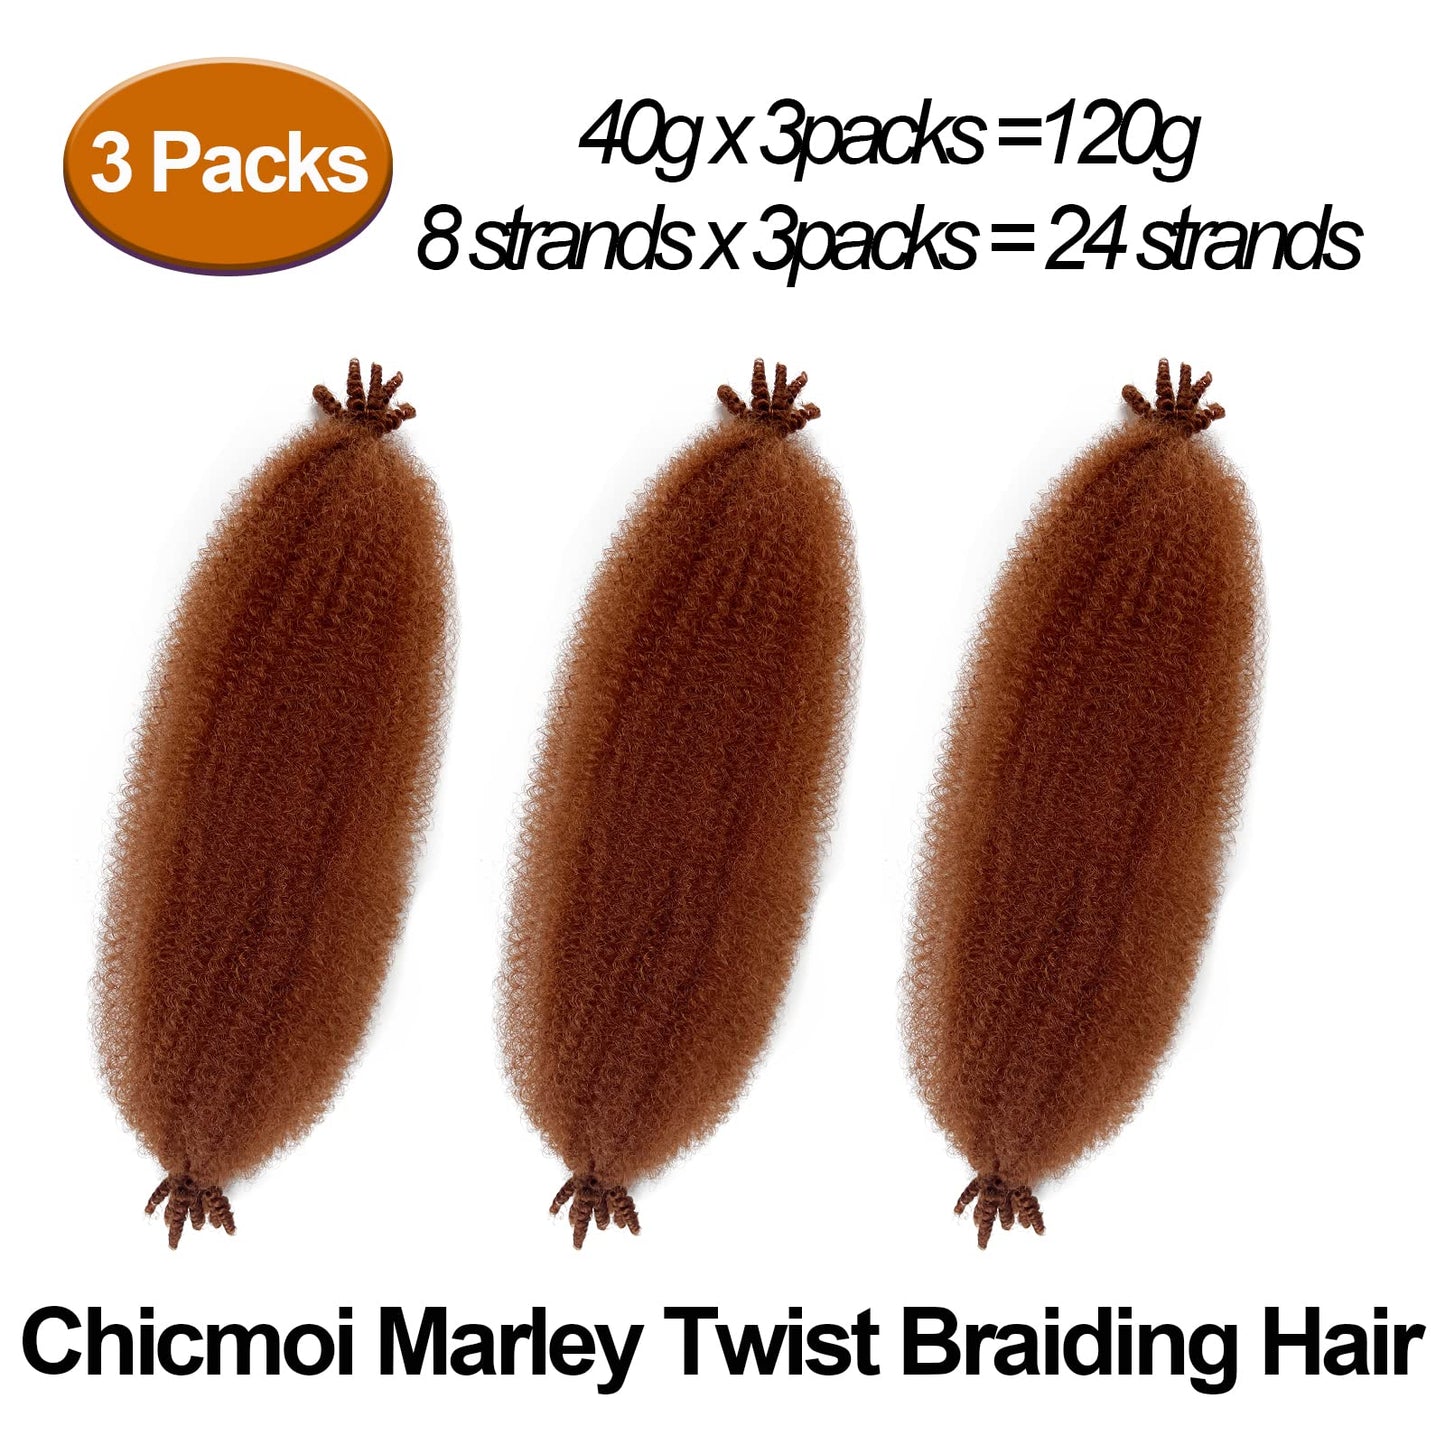 Marley Twist Braiding Hair 16 Inch Ginger Curly Braiding Hair 350 Springy Afro Twist Hair Red Copper Kinky Twist Hair for Braiding 3 Packs Cuban Twist Hair for Distressed Faux Locs (16in 8P 350)…